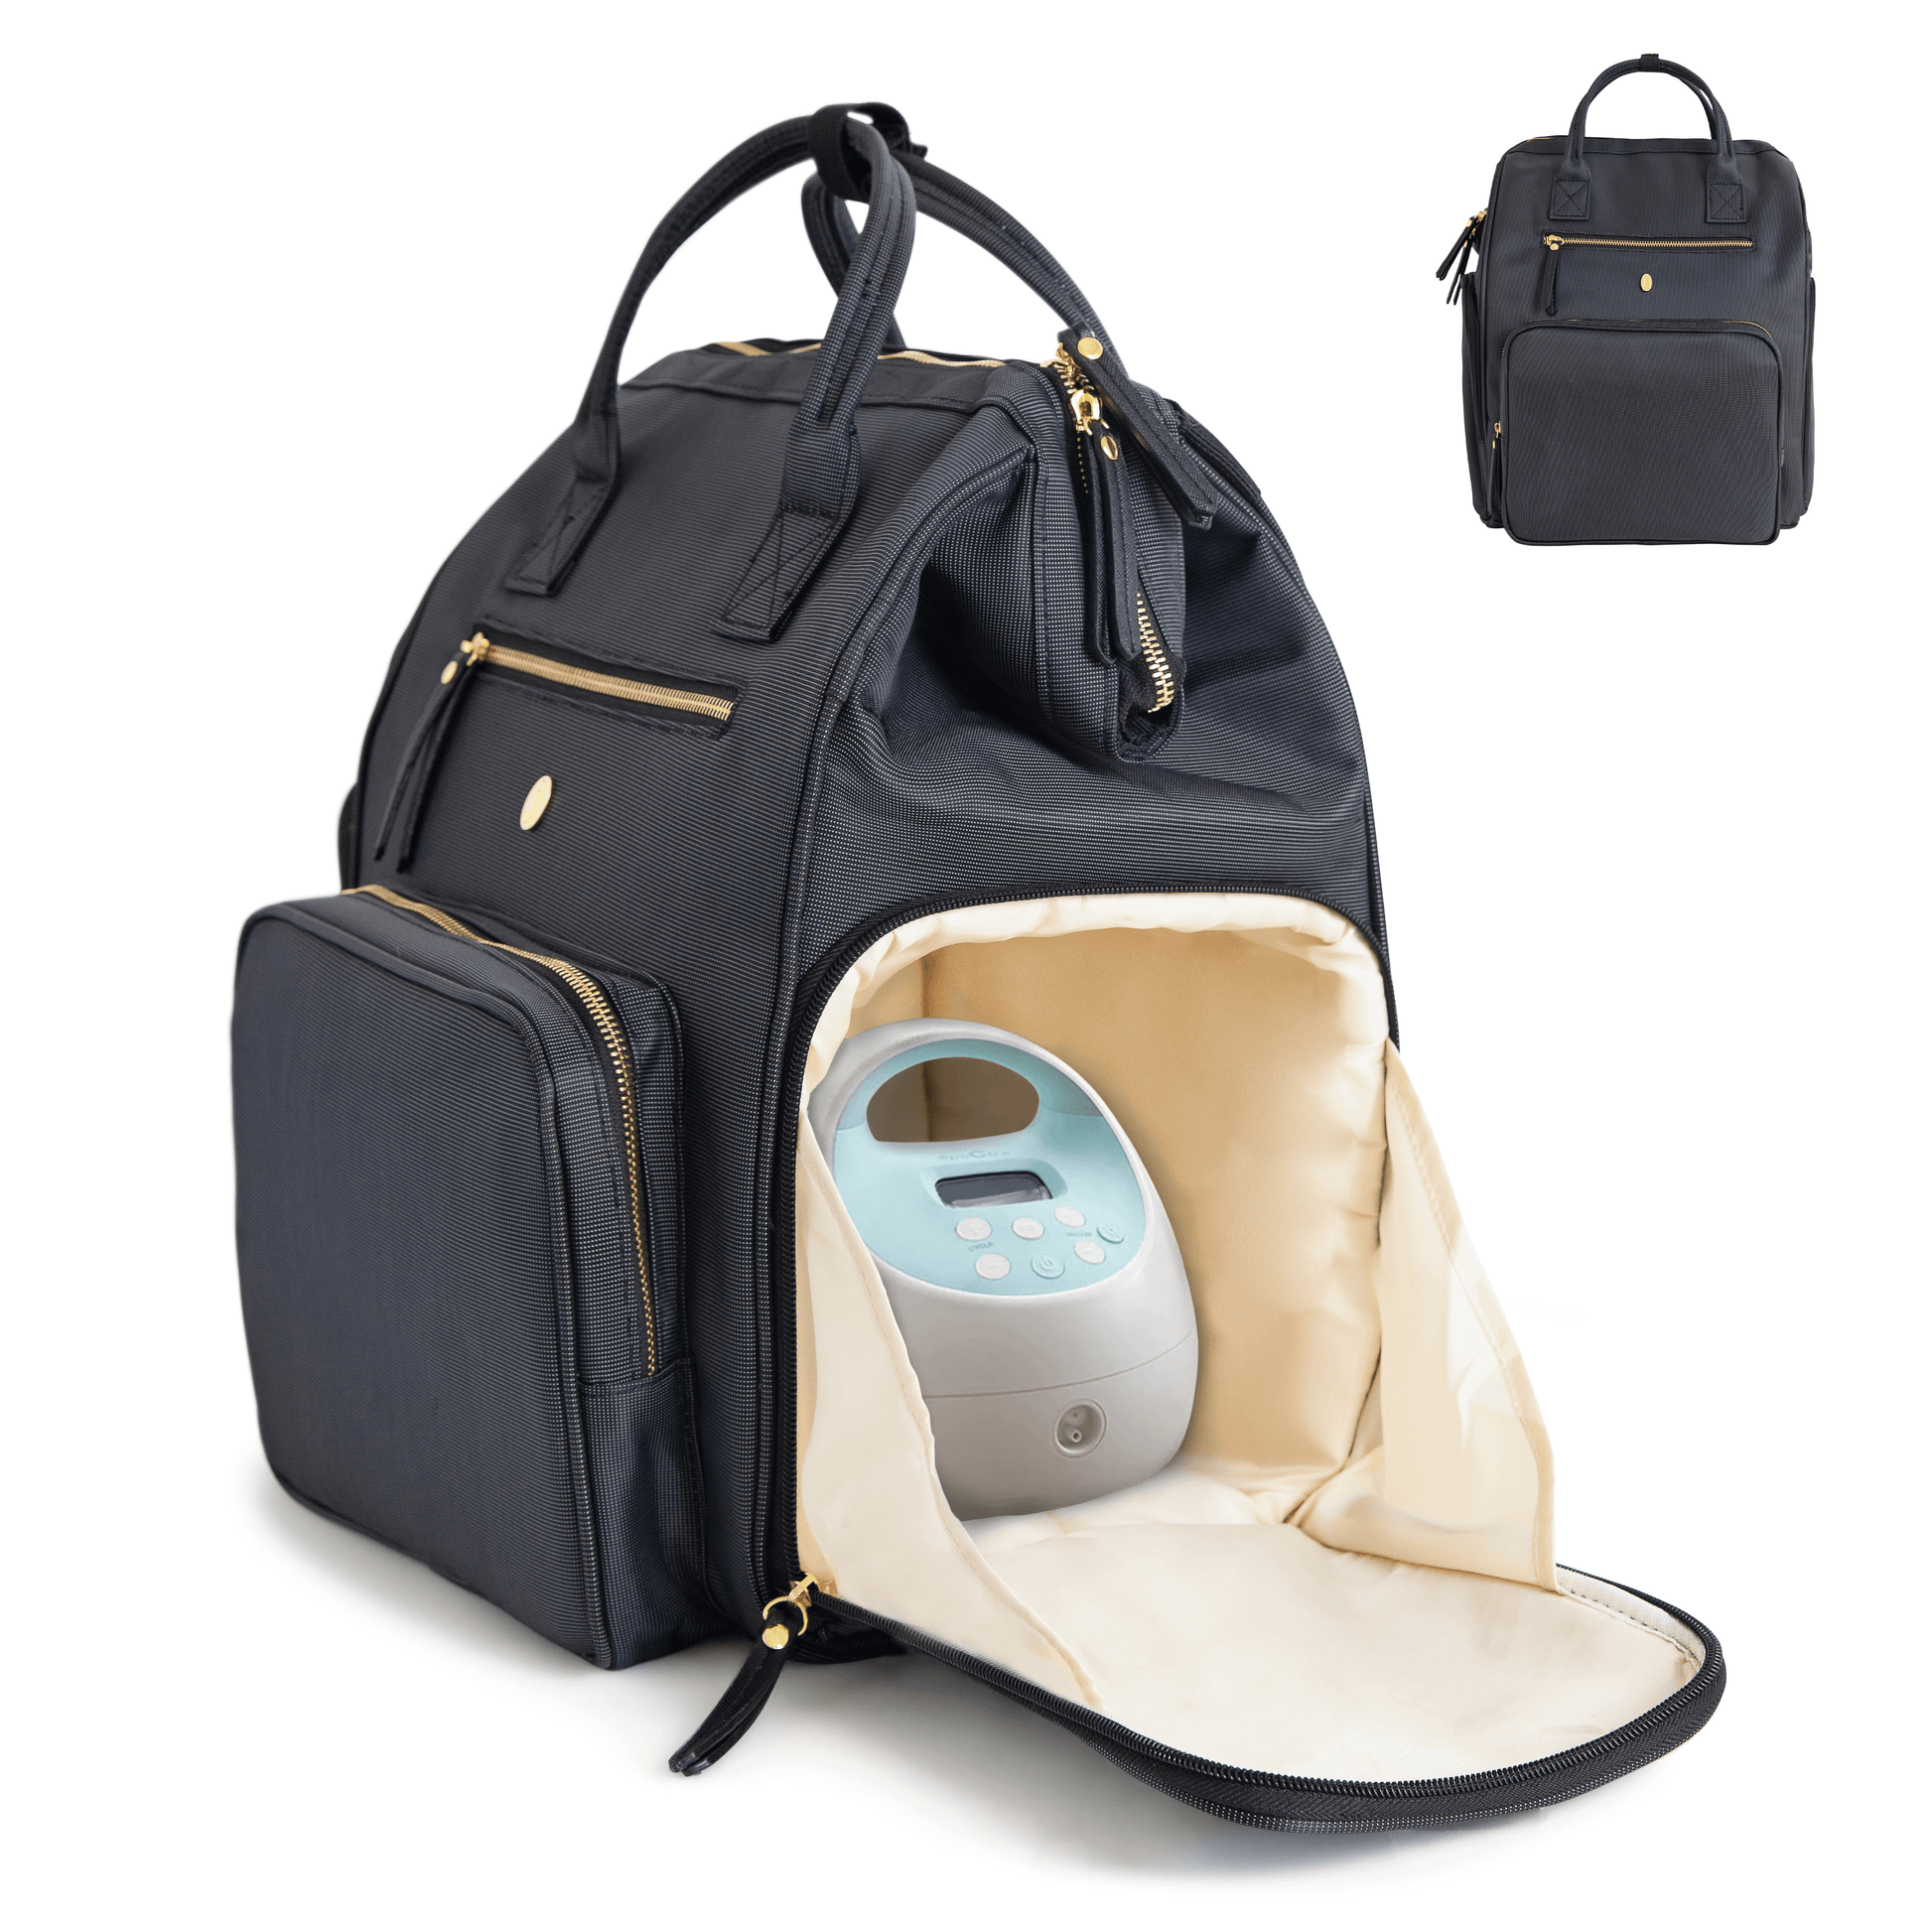 Breast Pump Bag Backpack Lunch Bag,With blue ice and storage